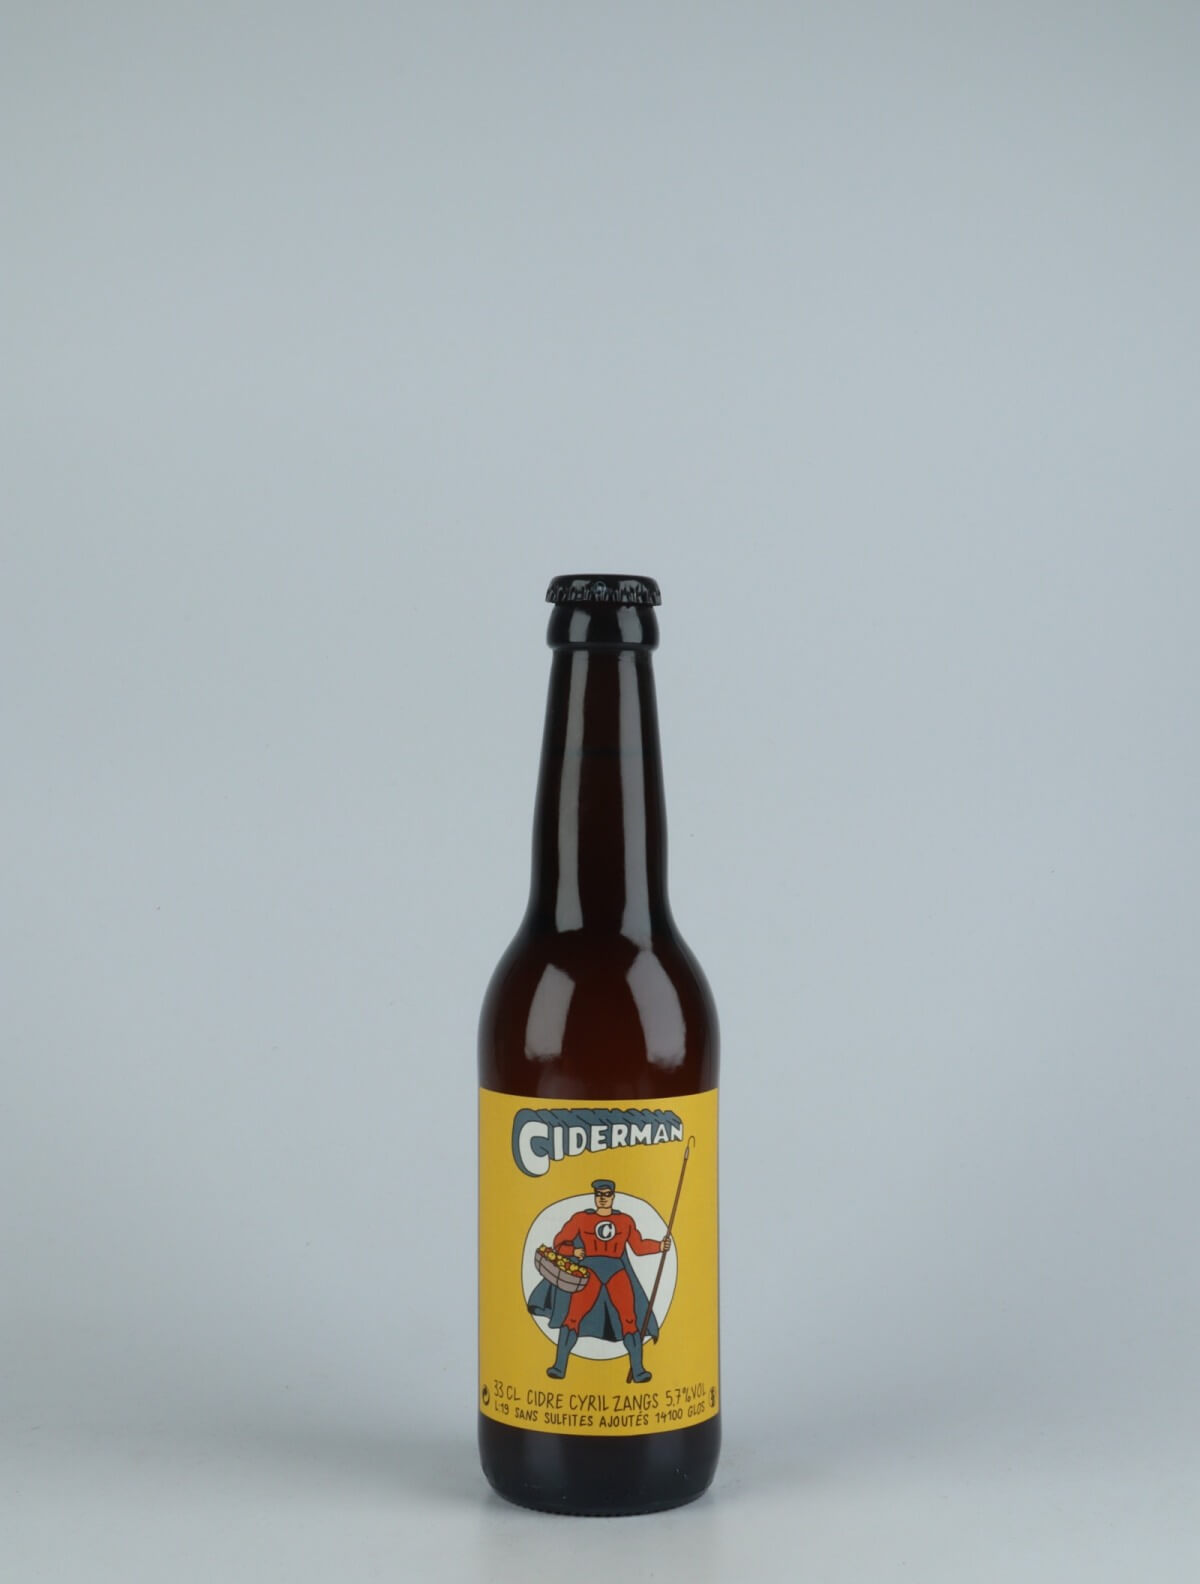 A bottle 2019 Ciderman Cider from Cyril Zangs, Normandy in France